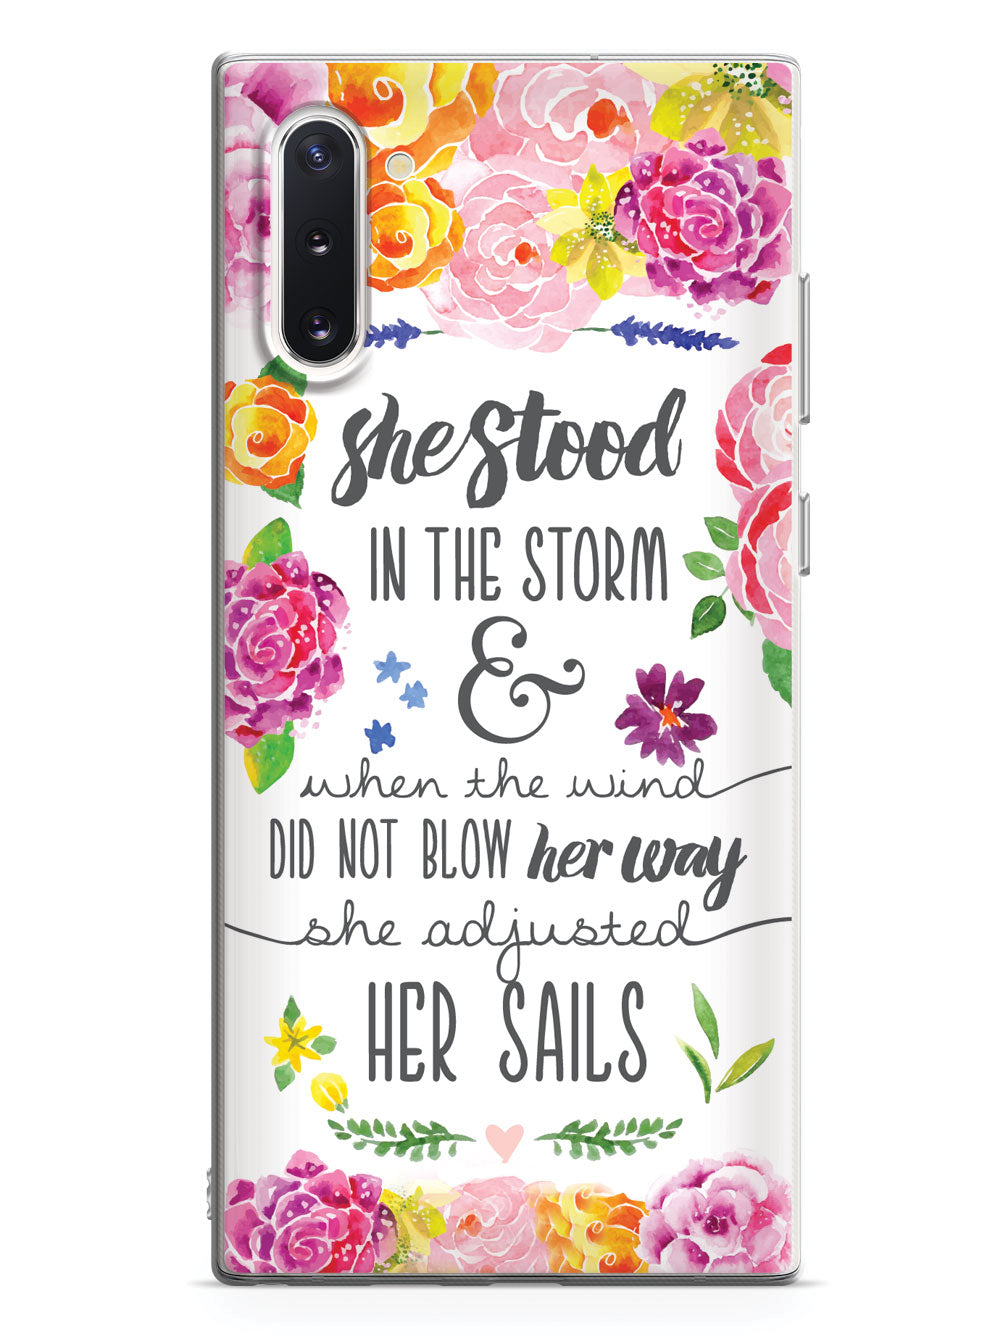 She Stood In The Storm - Elizabeth Edwards Quote Case